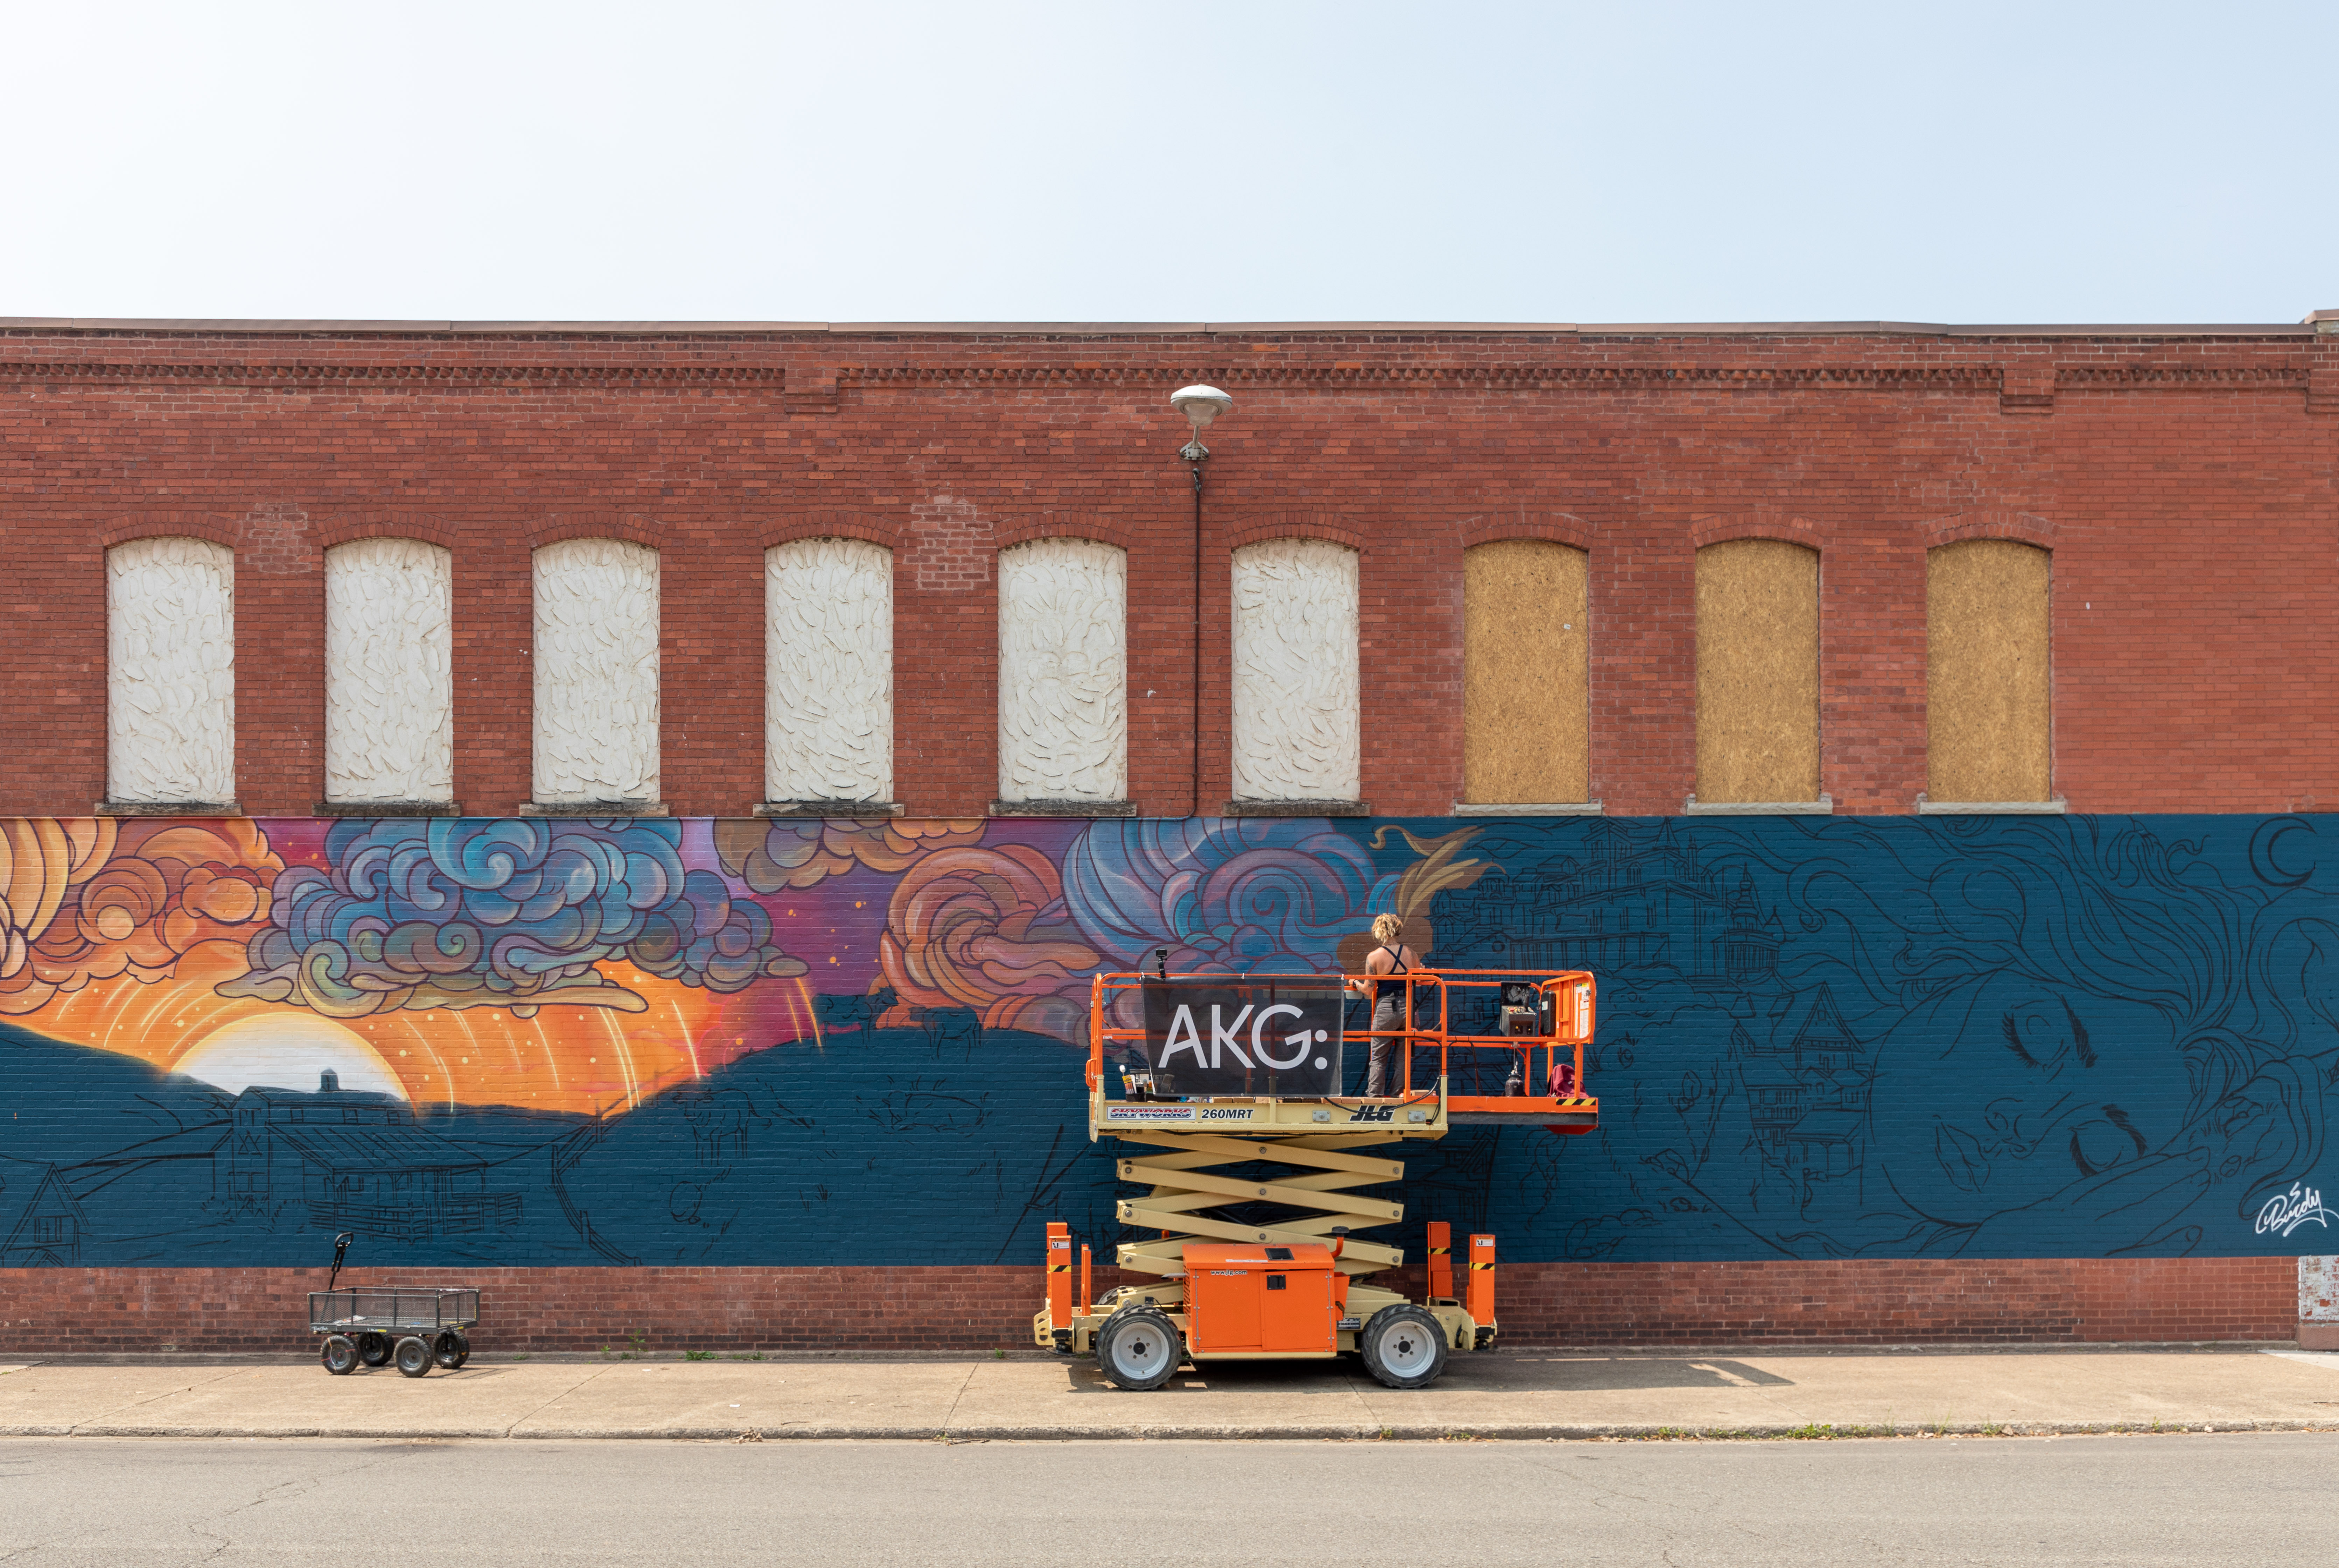 A woman of light skin tone stands on an orange hydraulic lift painting a mural on the side of a red brick building